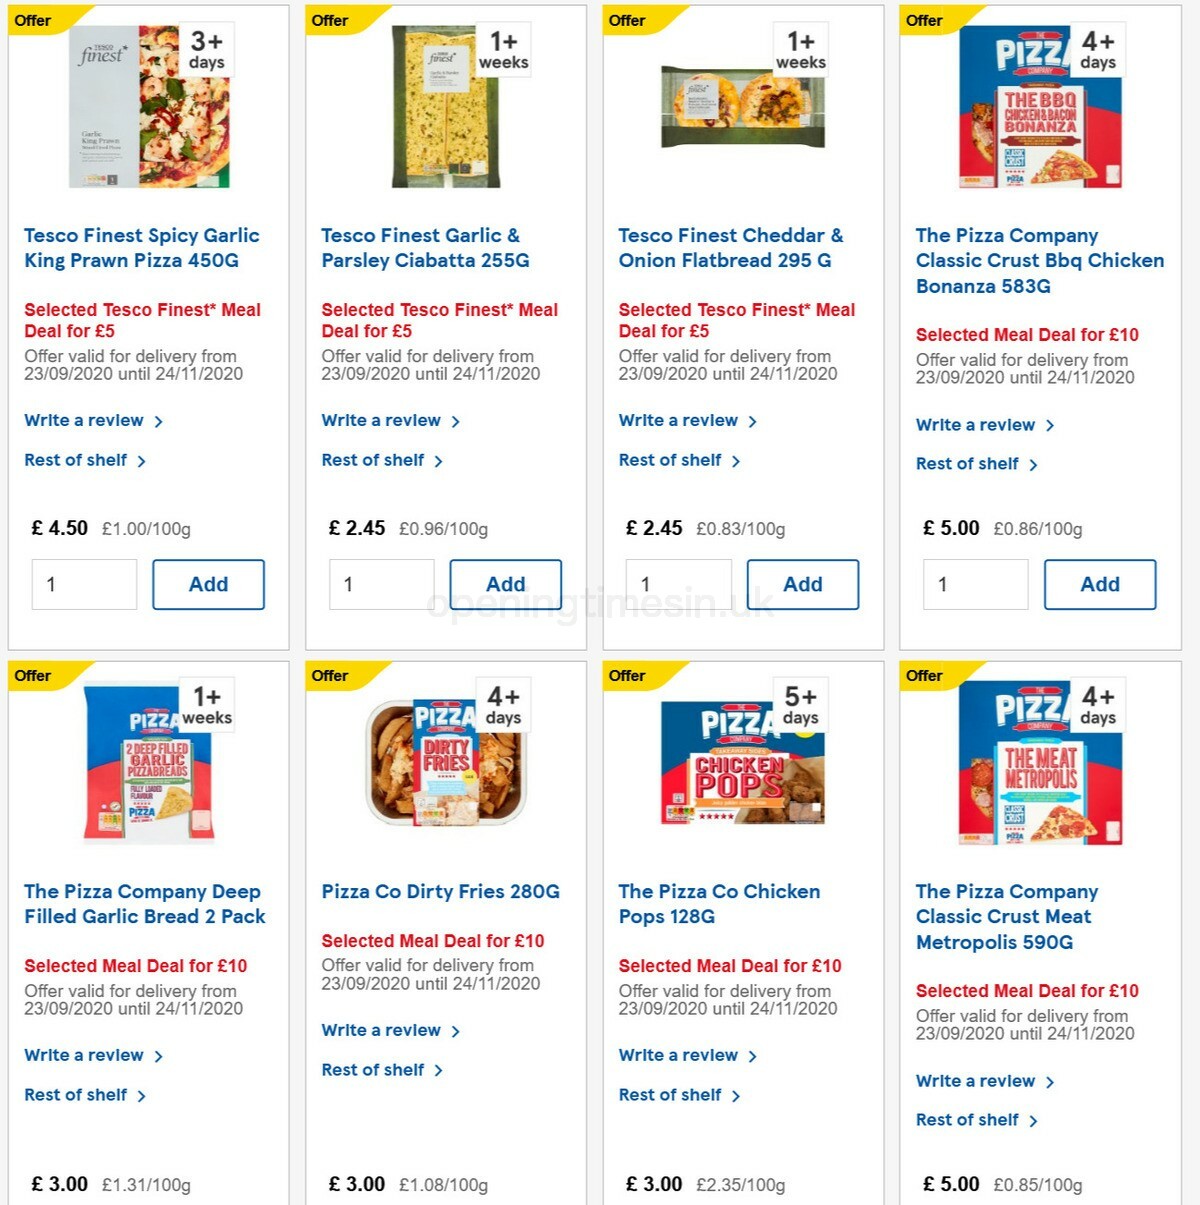 TESCO Offers from 28 October